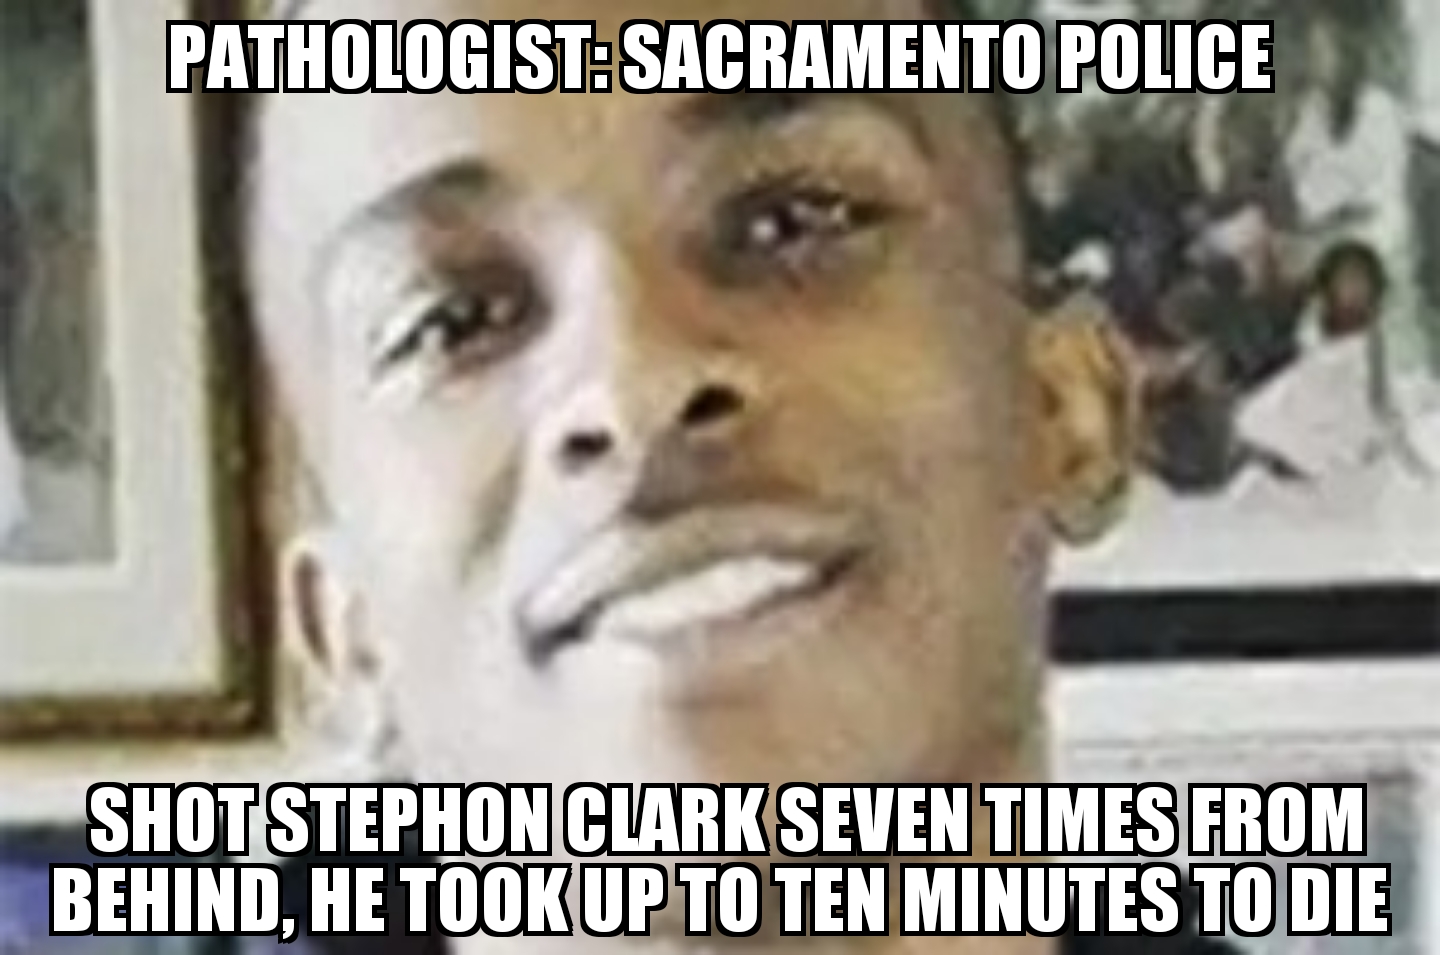 Sacramento police shot Stephon Clark 7 times from behind